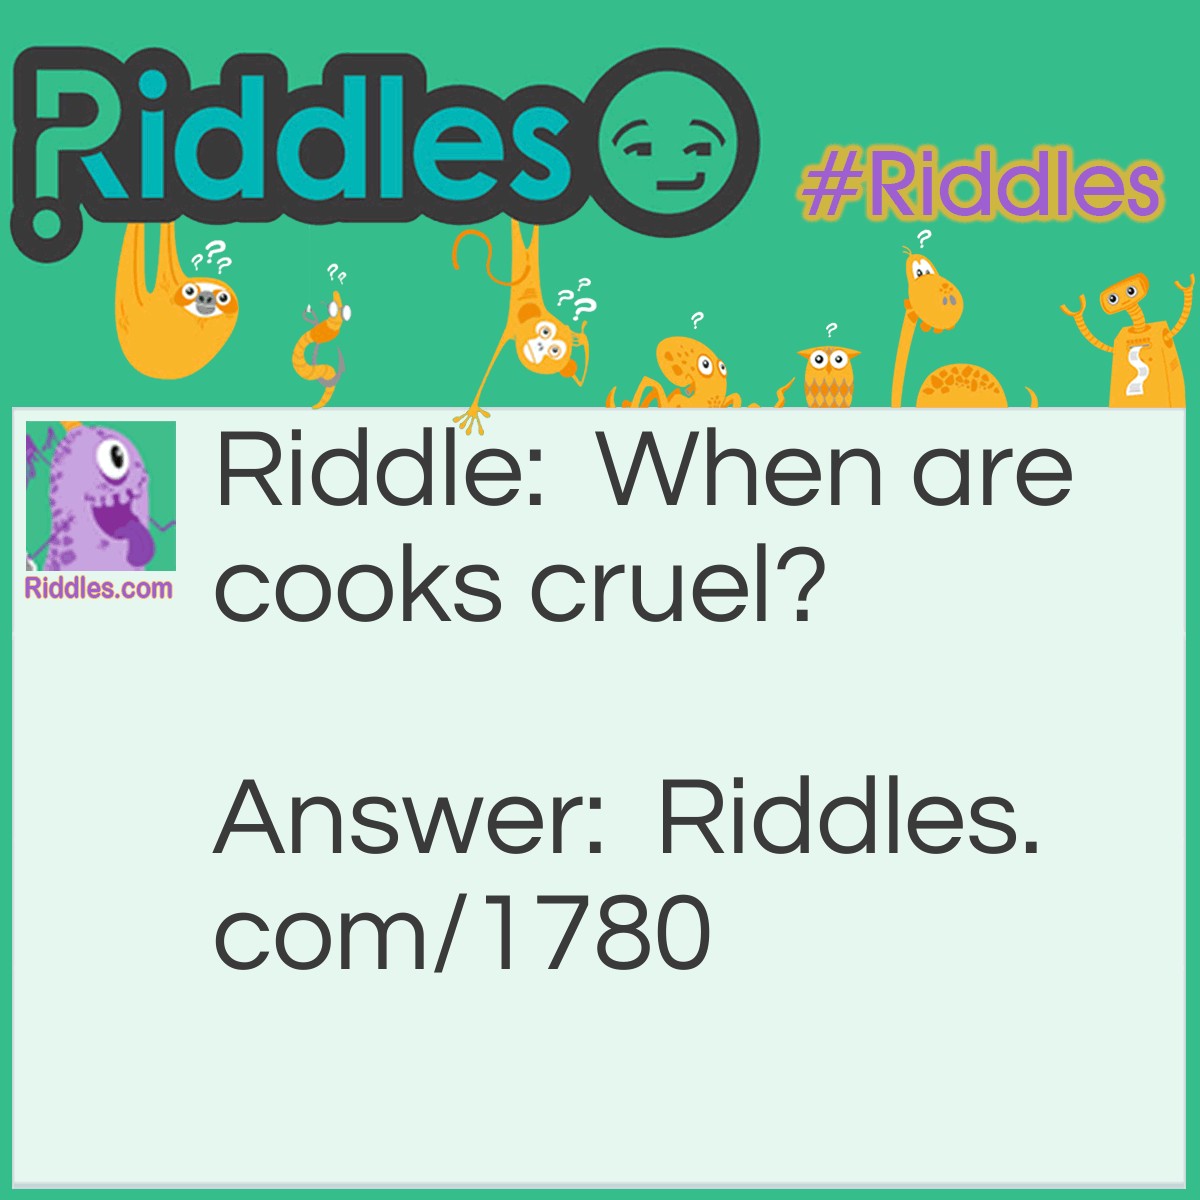 Riddle: When are cooks cruel? Answer: When they beat the eggs and whip the cream.